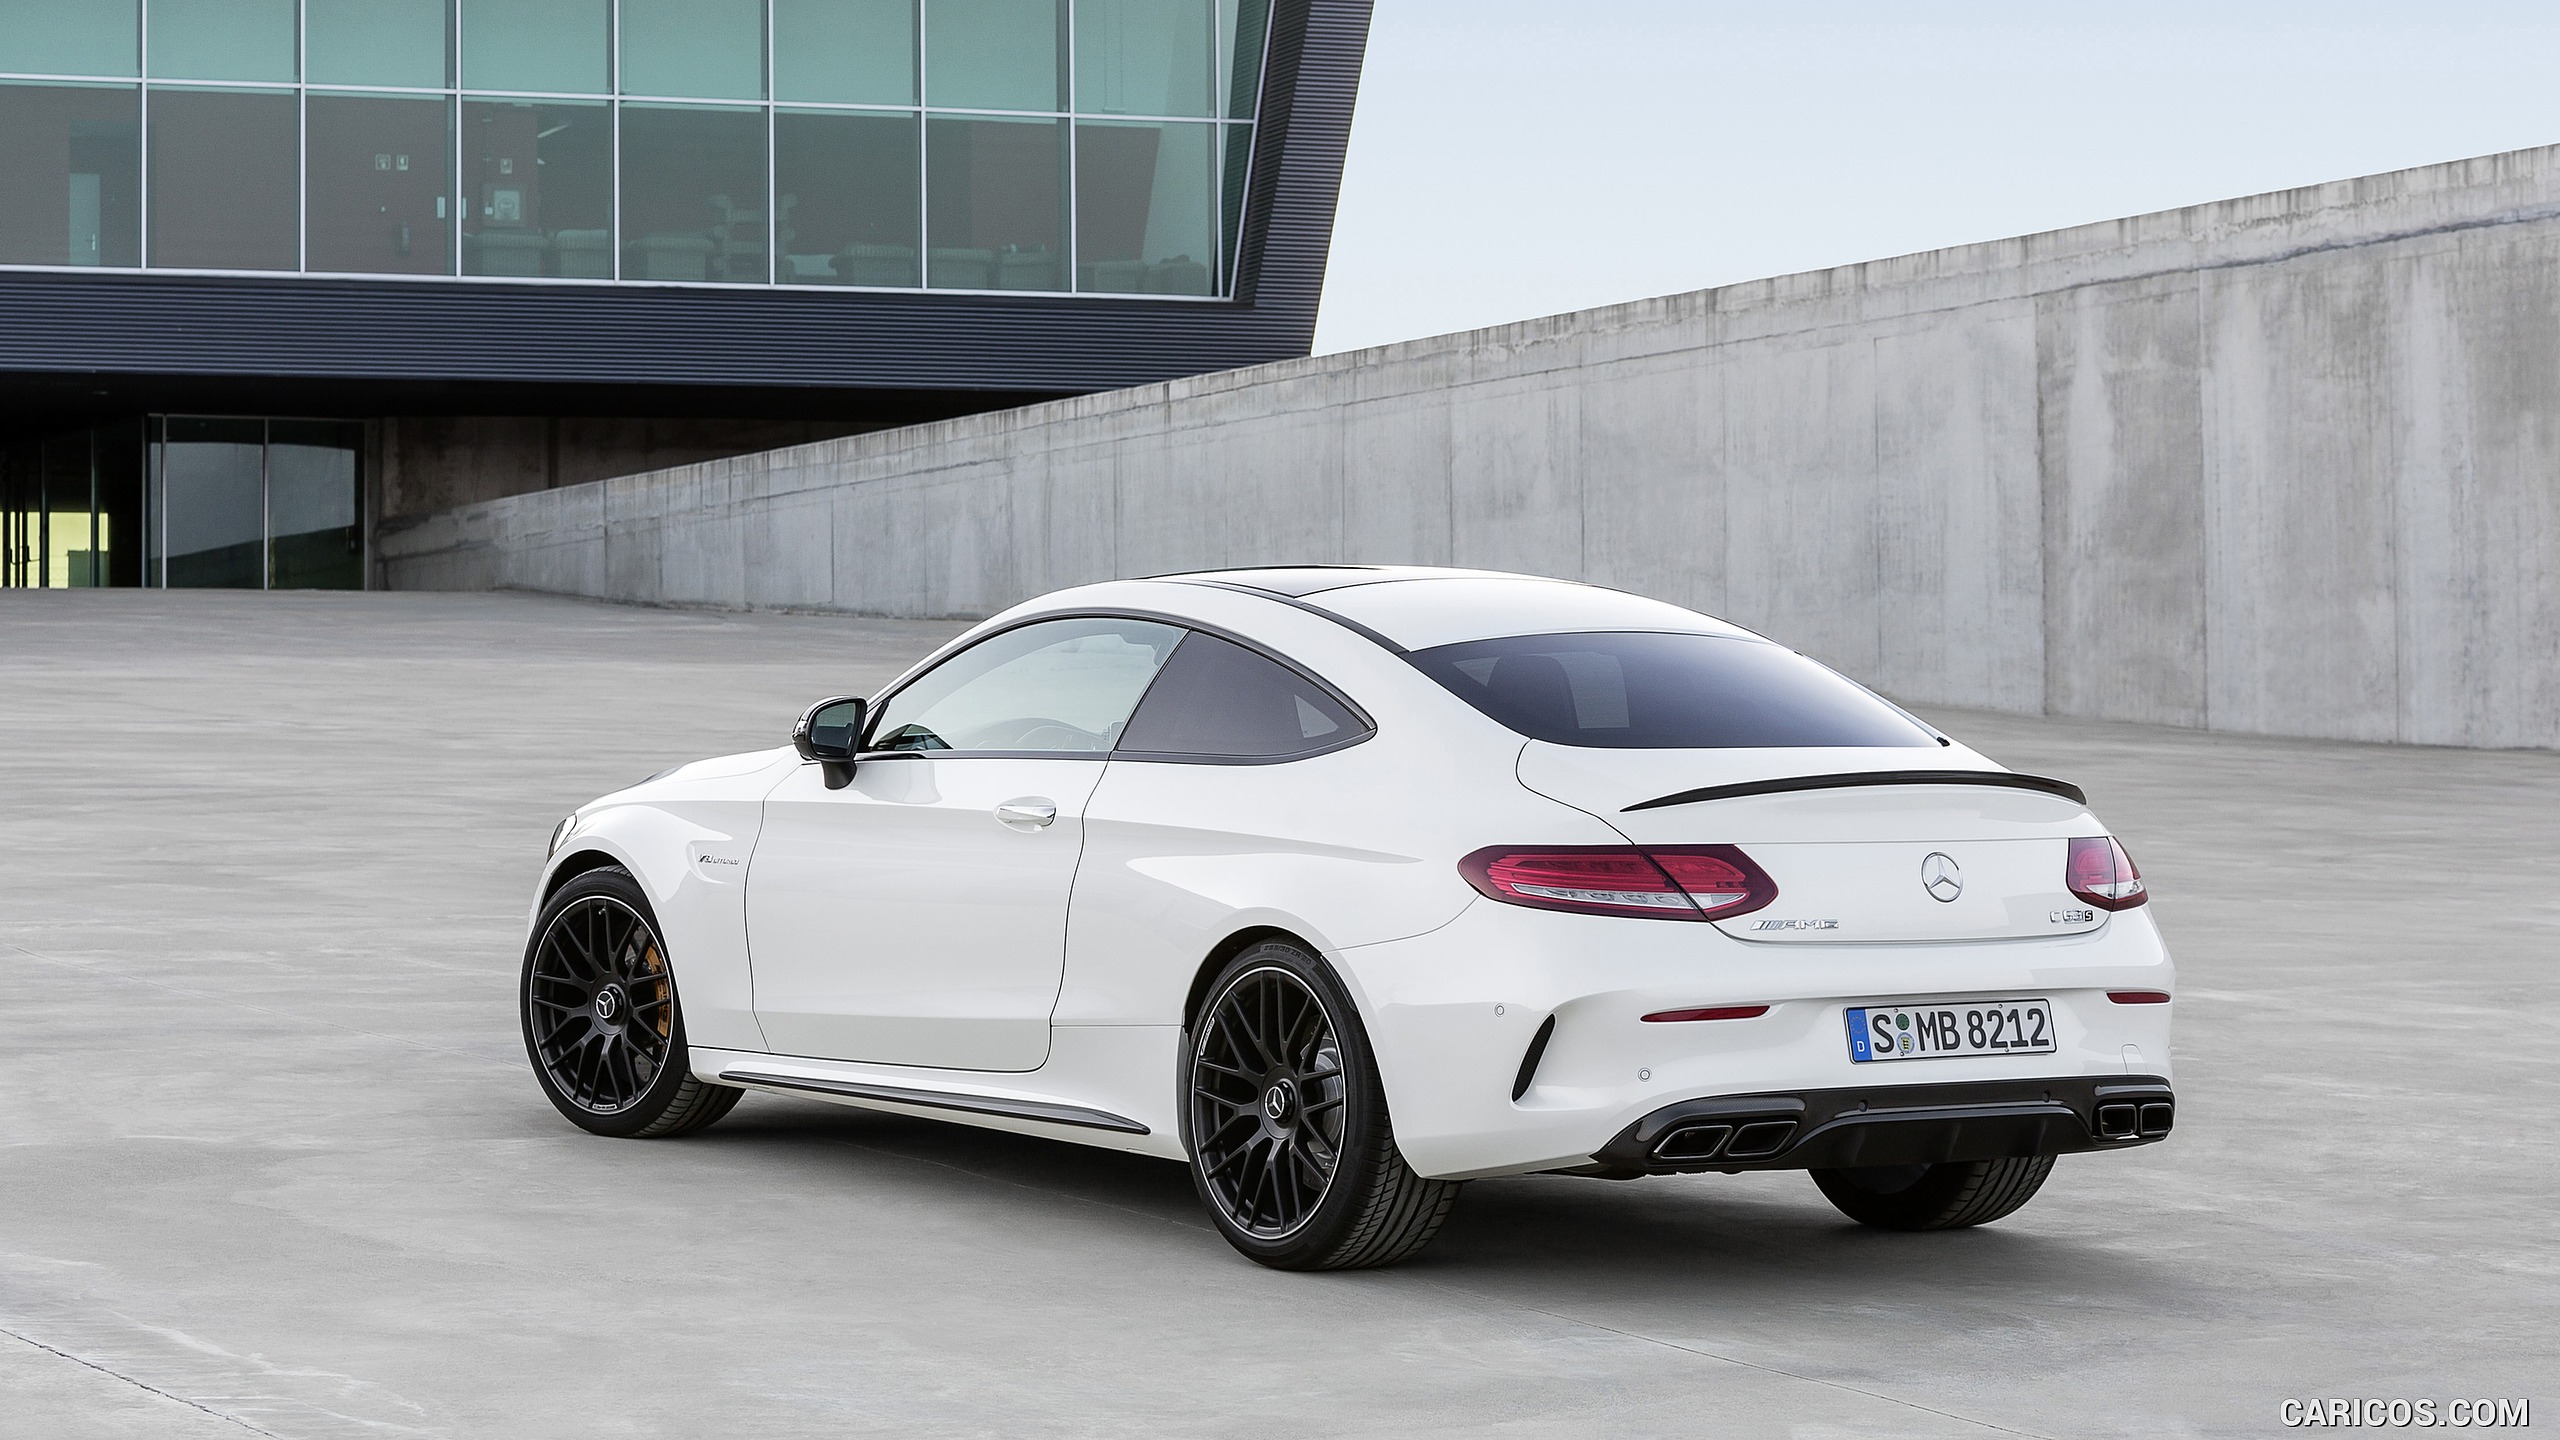 2017 Mercedes-AMG C63 S Coupe (Designo Diamond White Bright with Night Package) - Rear, #33 of 107